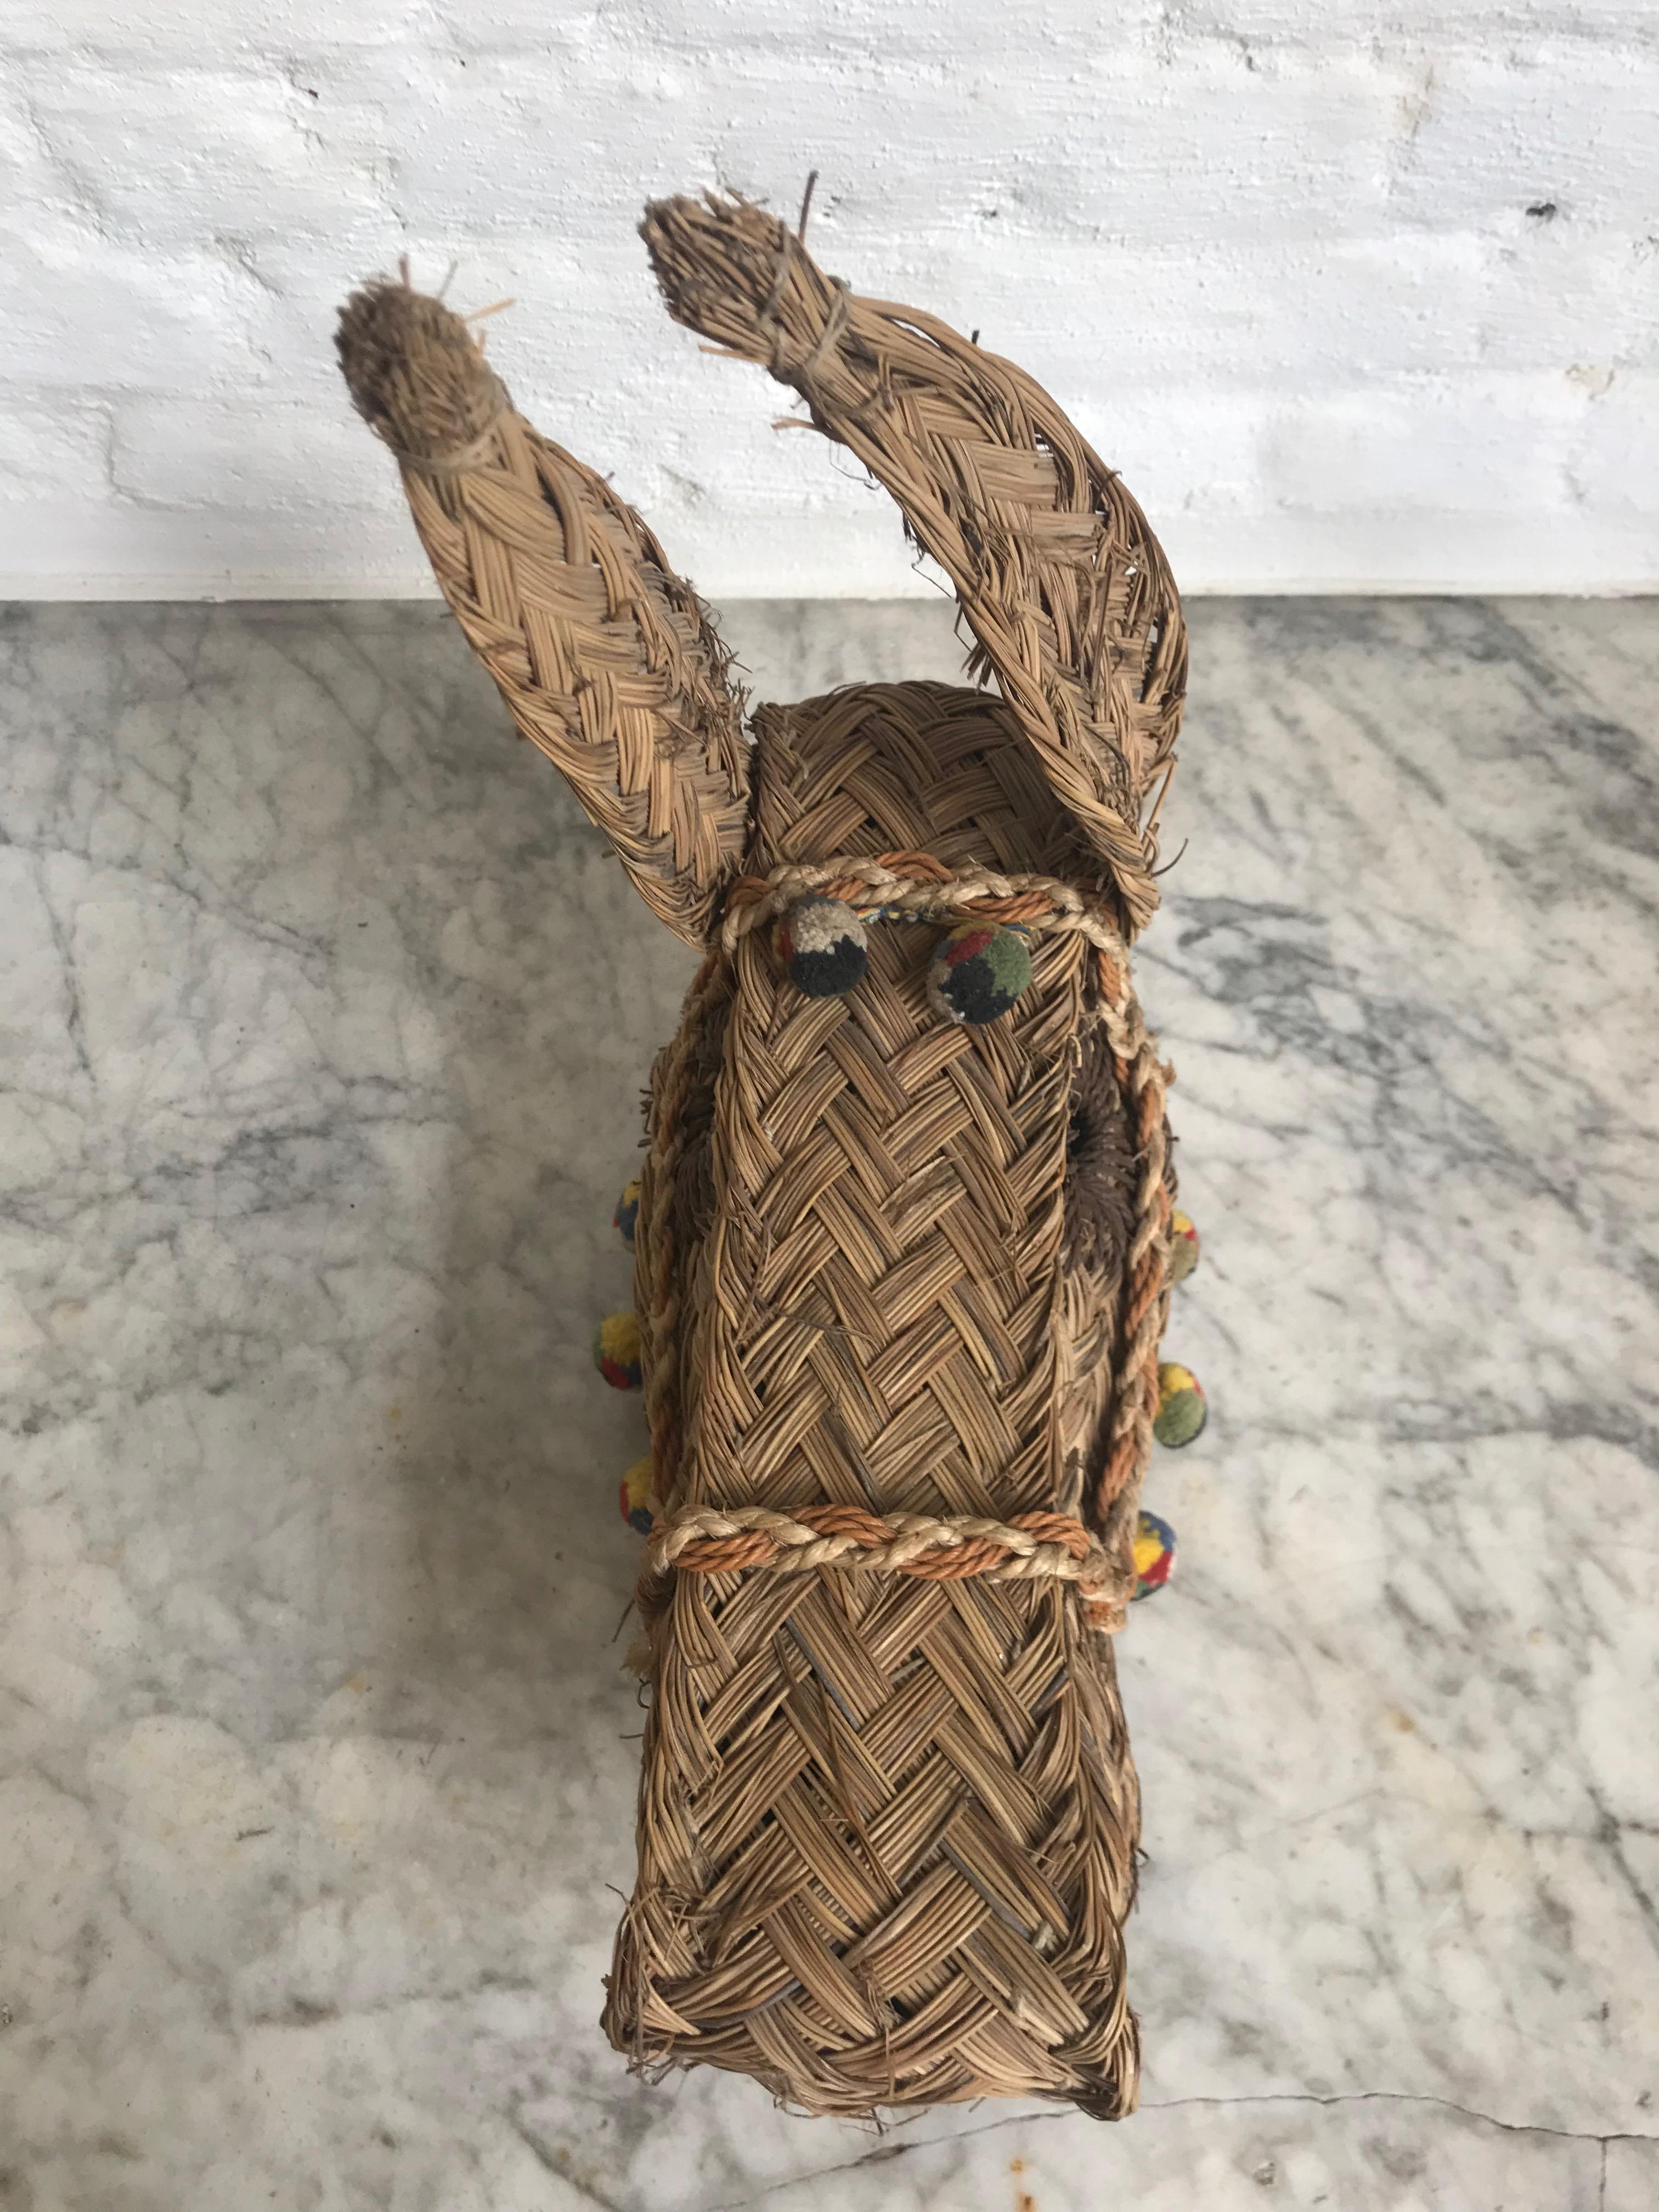 Spanish folk art hand woven esparto straw mule head with textile fringe, circa 1970. In really good condition ready to hang.
Esparto is a type of fibrous grass used in the making of baskets and espadrilles in Northern Spain.